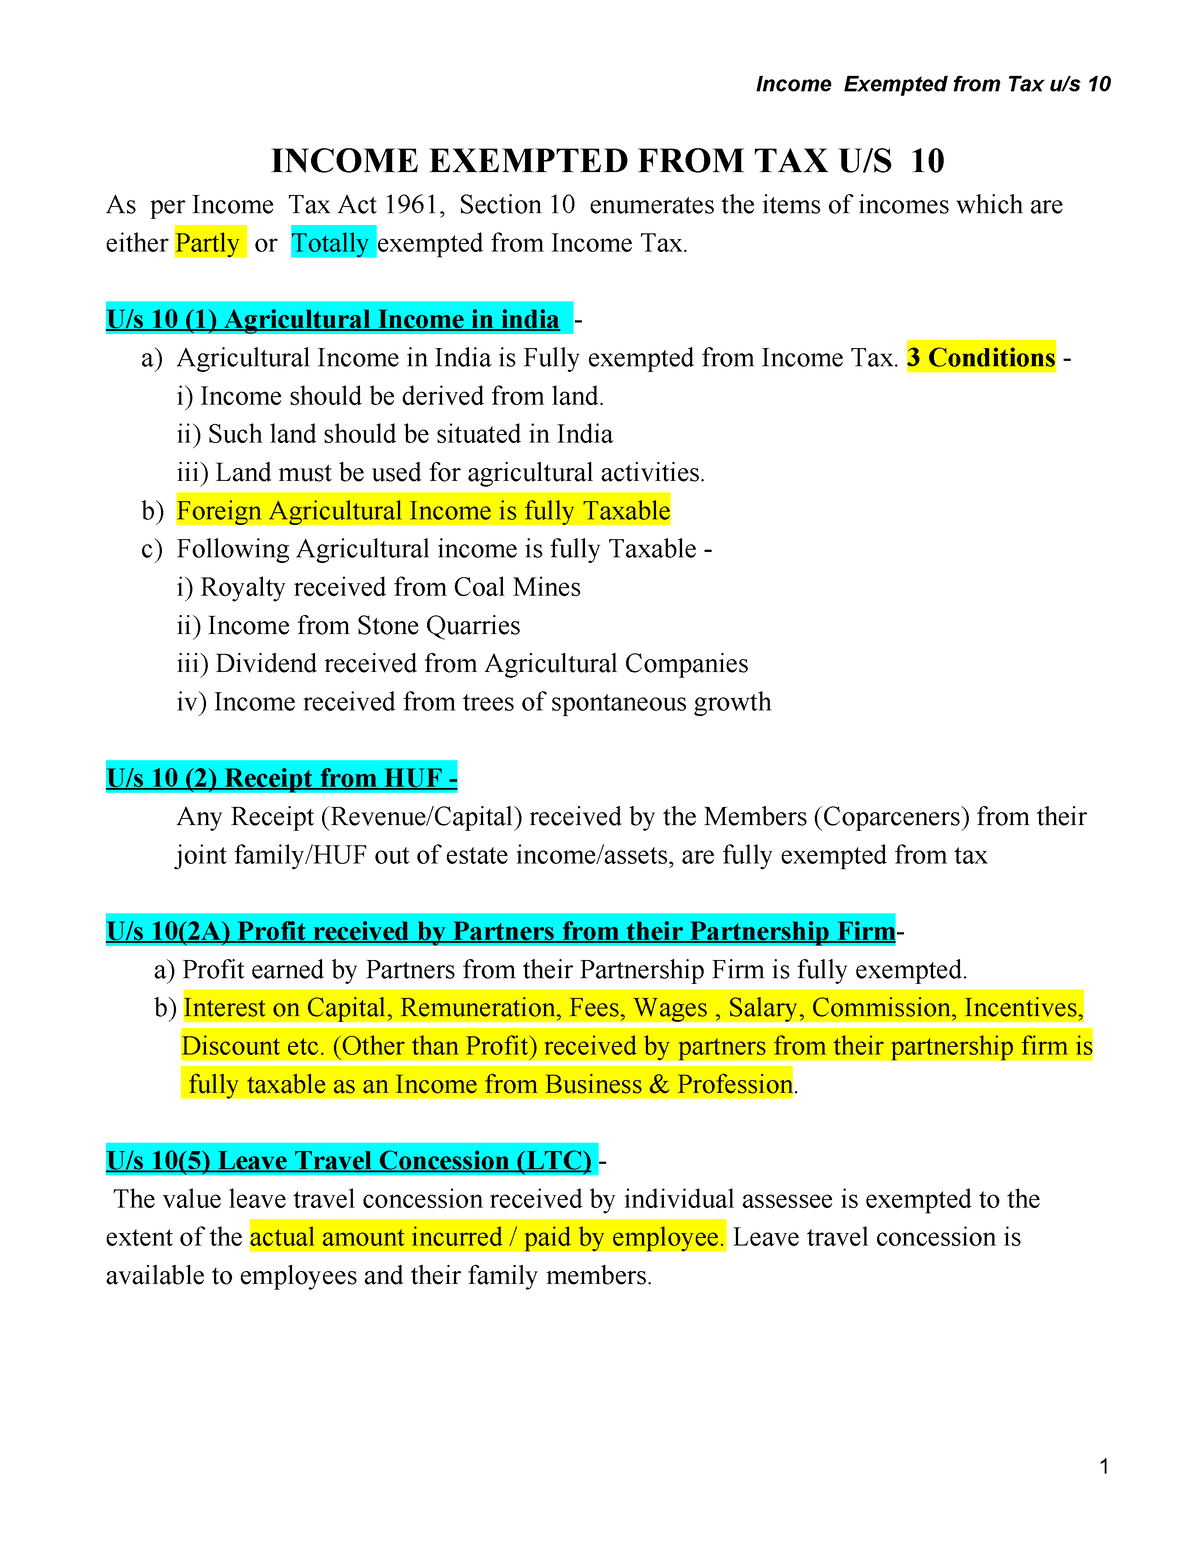 Income Exempted U s 10 Lecture Notes INCOME EXEMPTED FROM TAX U S 